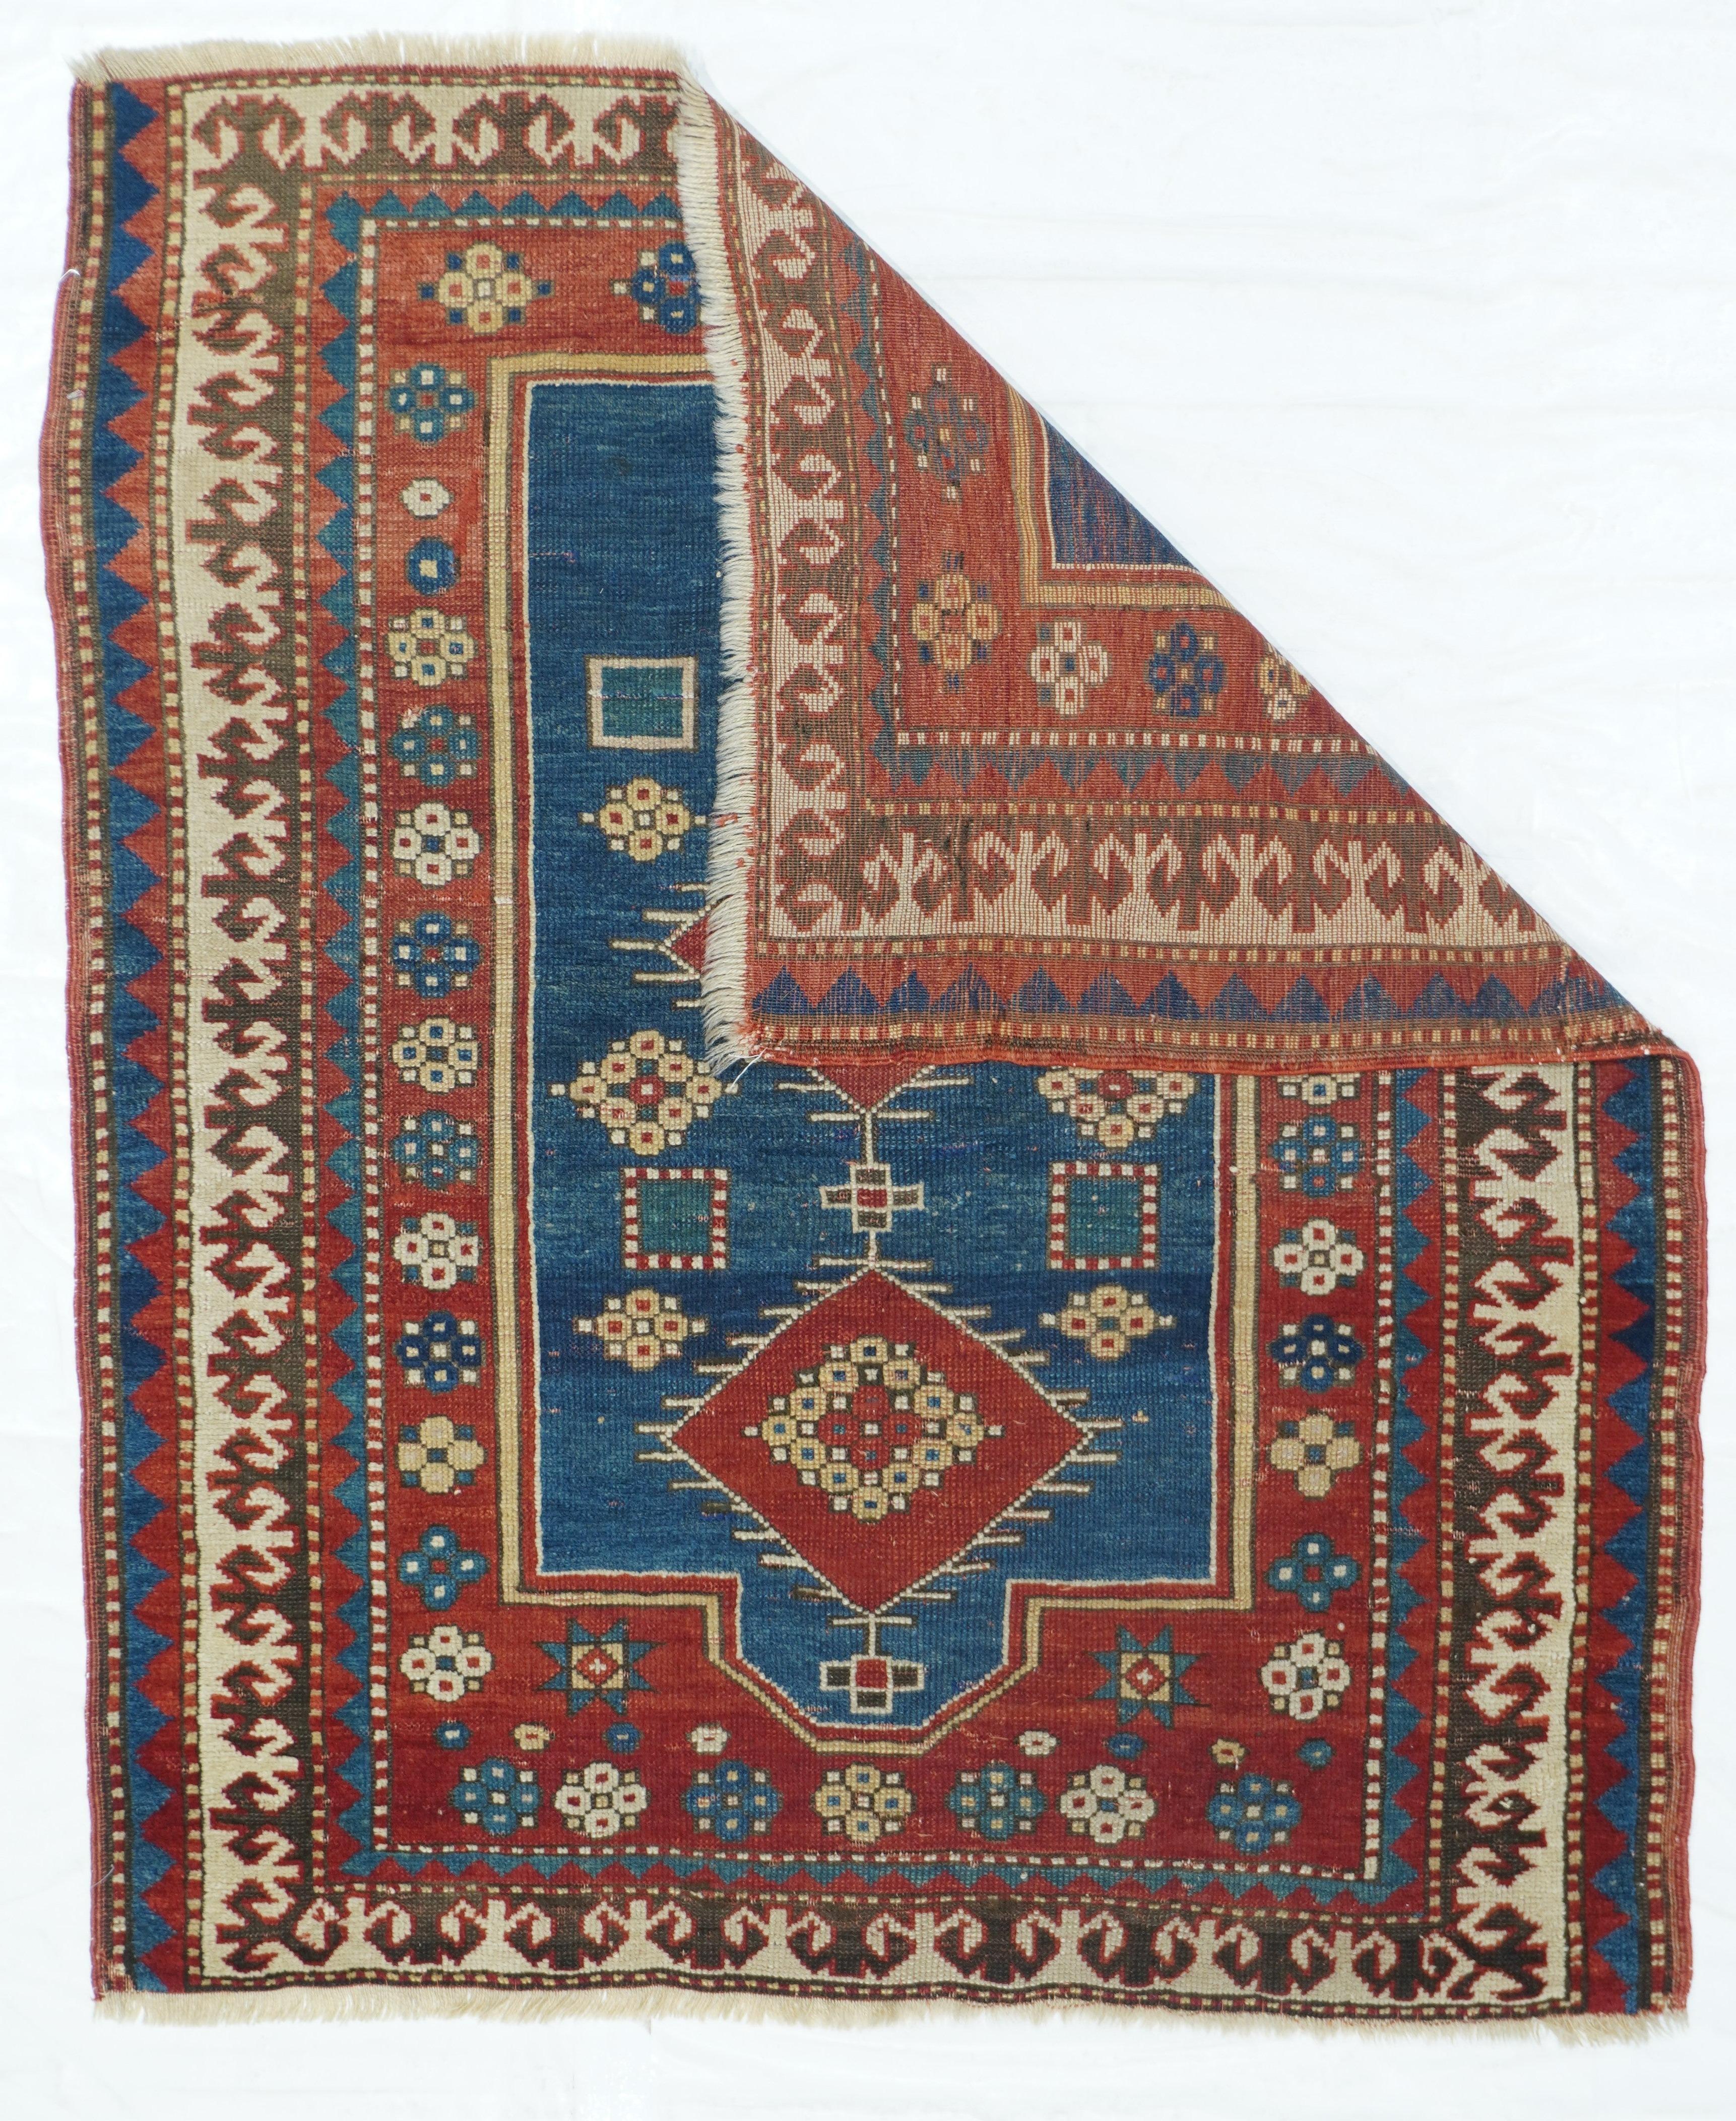 Antique Fachralo Kazak rug, measures : 3'4'' x 3'9''. Although suffering from severe end reduction with both outer minor borders lost, this all naturally dyed, Fachralo Kazak niche-layout scatter keeps up its Classic style with a faceted arch top